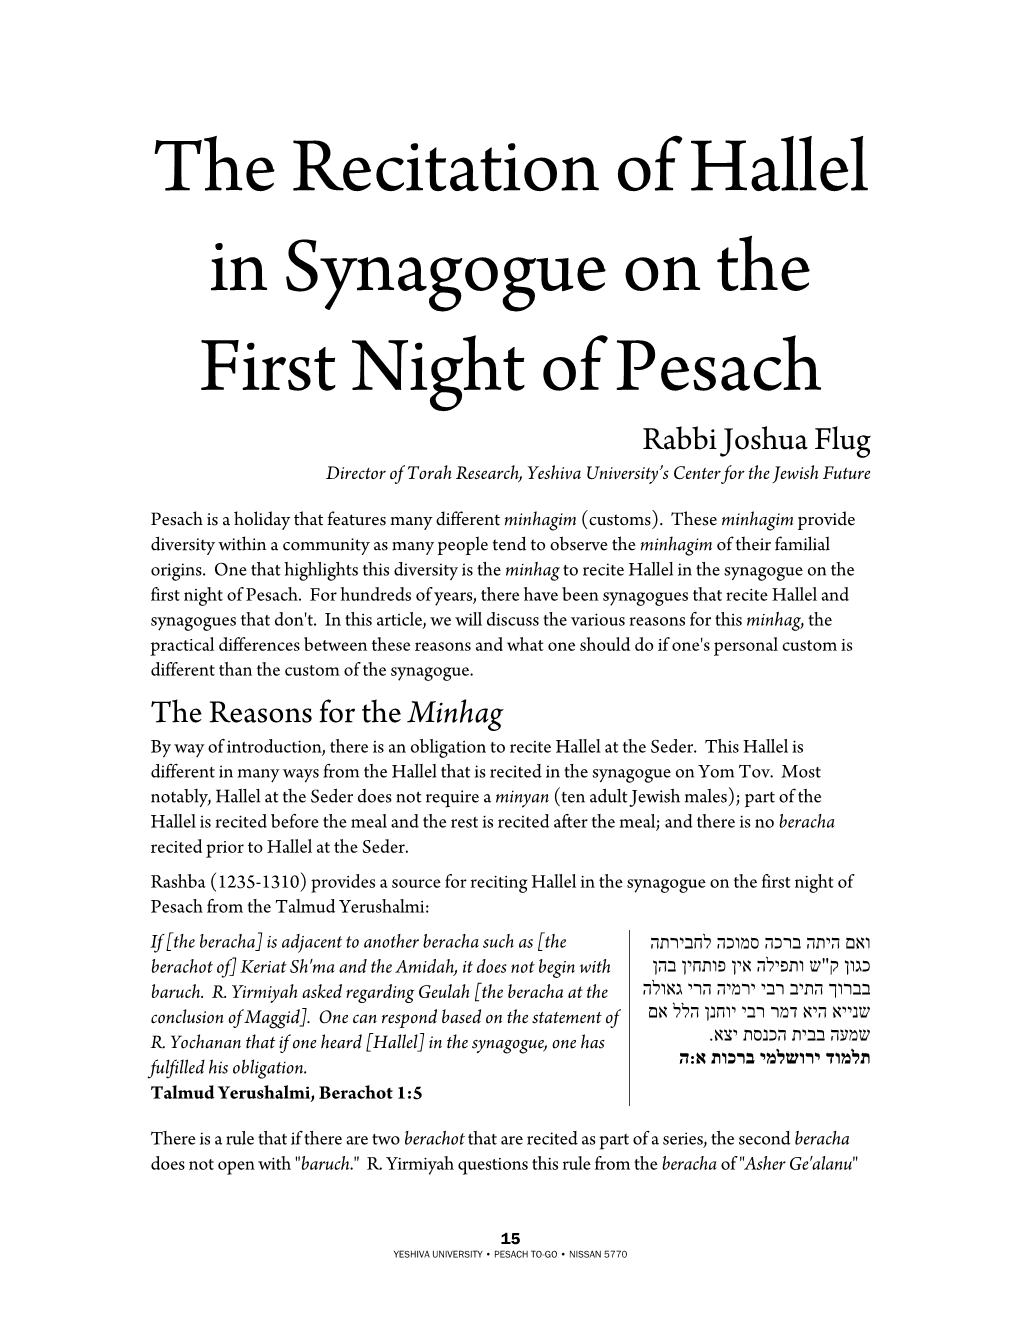 The Recitation of Hallel in Synagogue on the First Night of Pesach Rabbi Joshua Flug Director of Torah Research, Yeshiva University’S Center for the Jewish Future